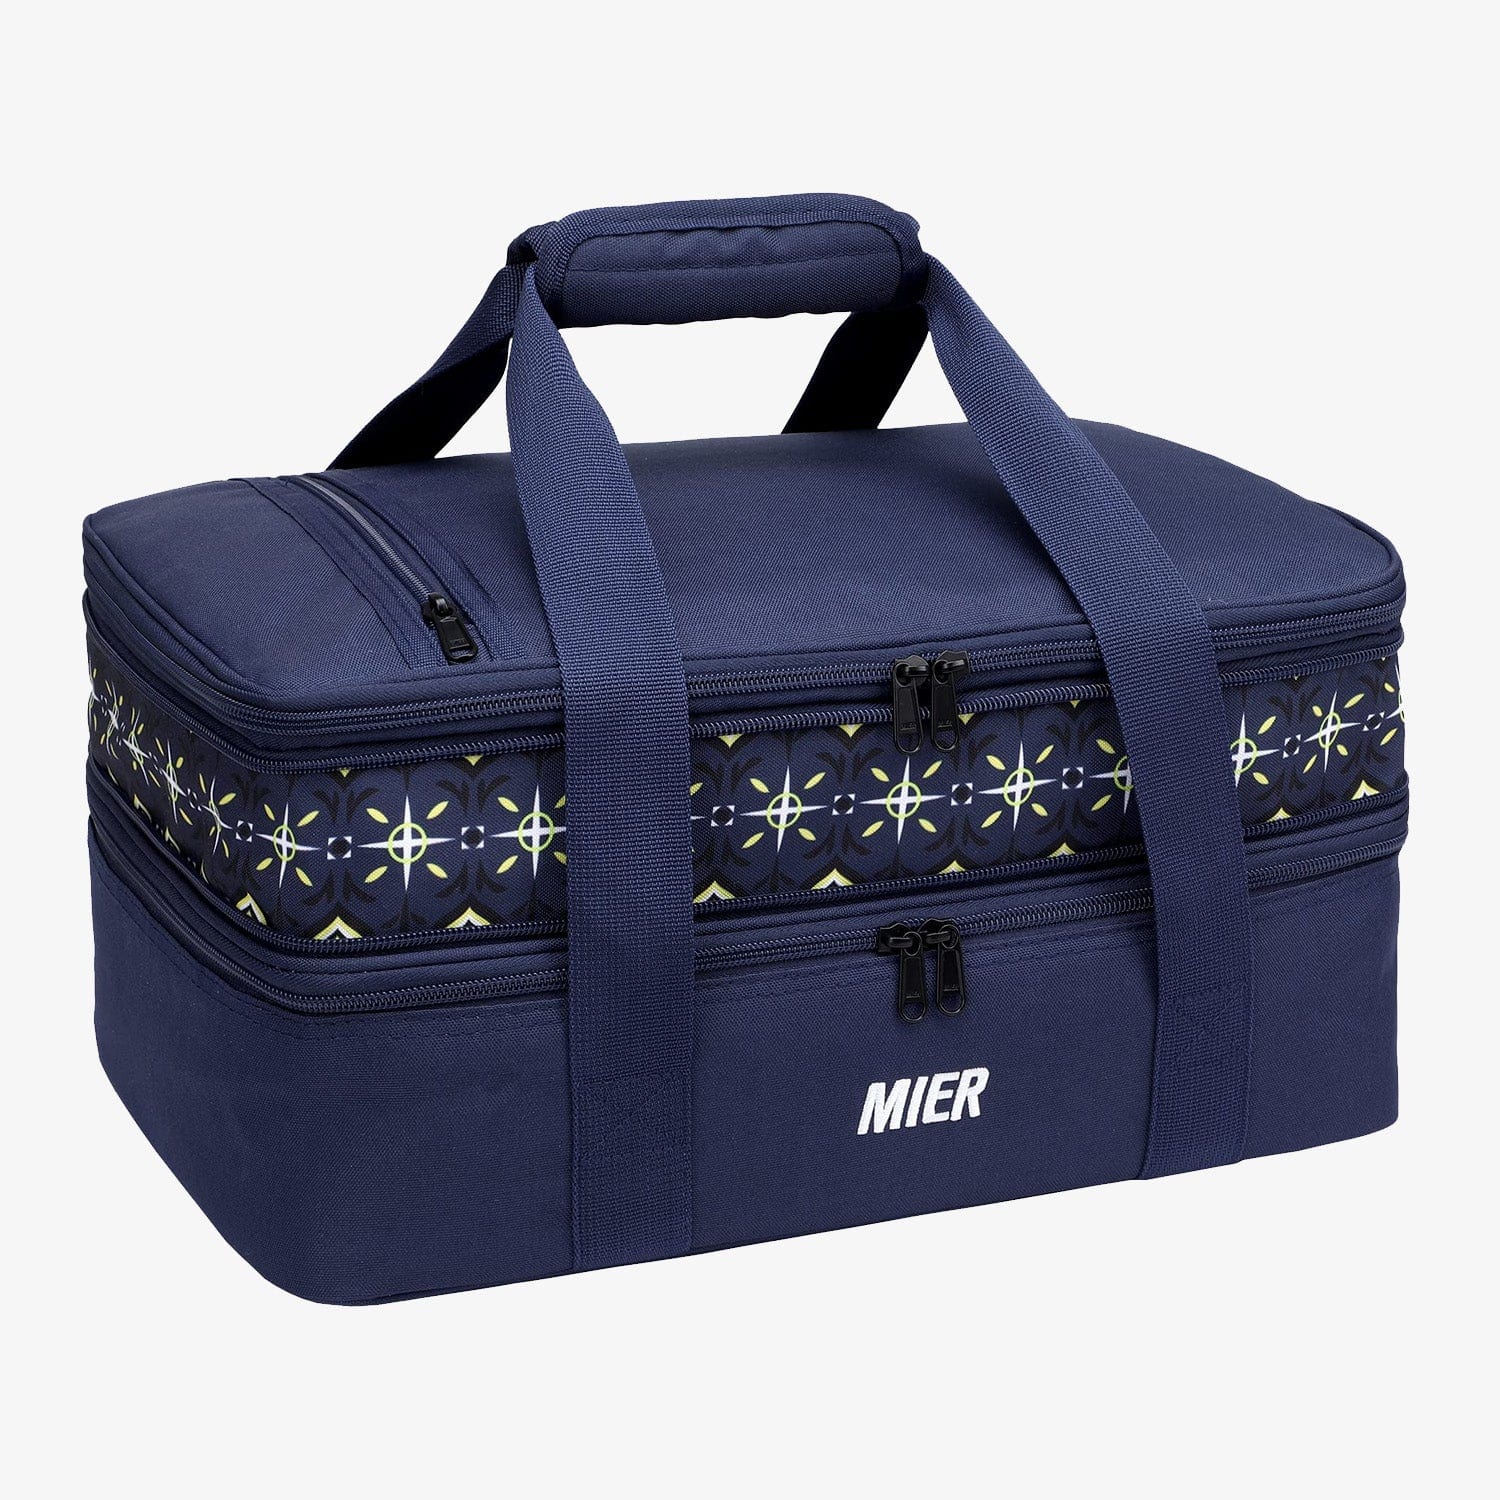 MIER Expandable Lunch Bag Insulated Lunch Box for Men Boys, Navy Blue